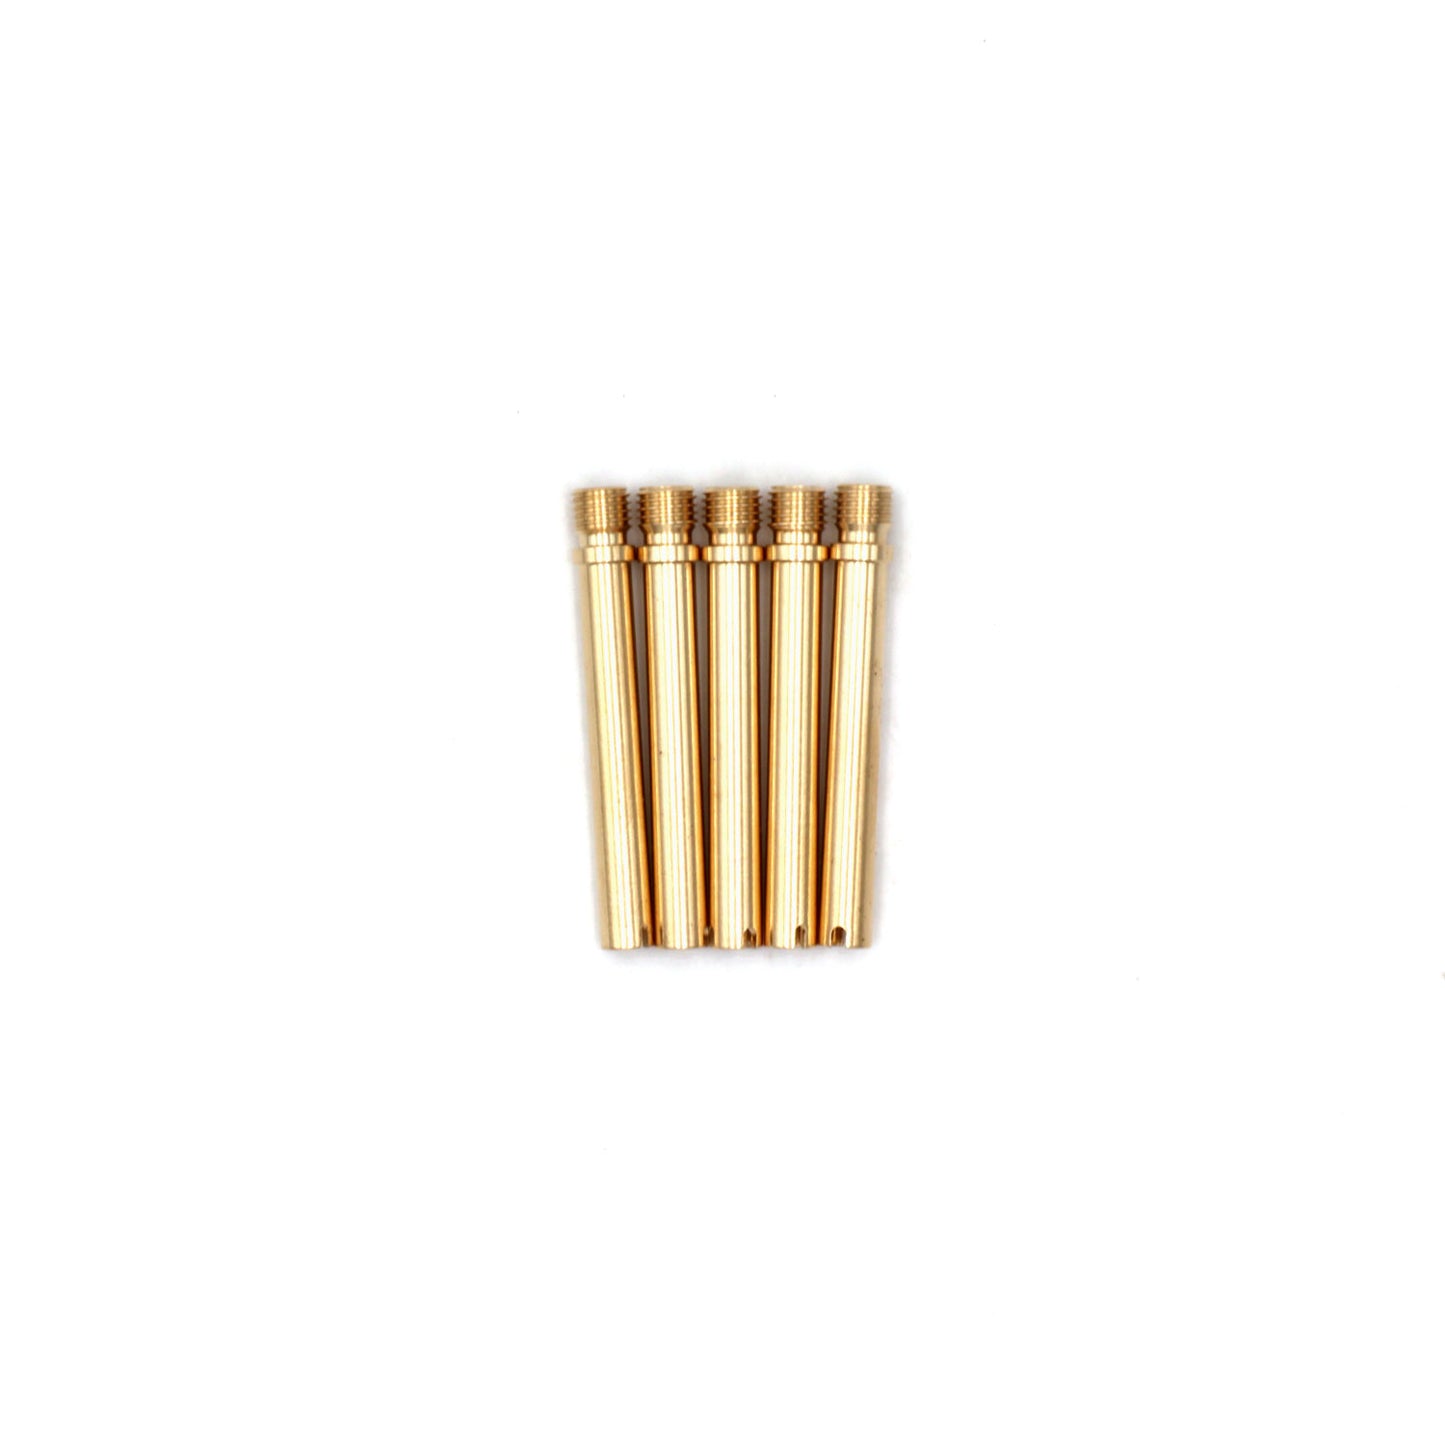 FY-XF300C Plasma Cutting Torch Consumables